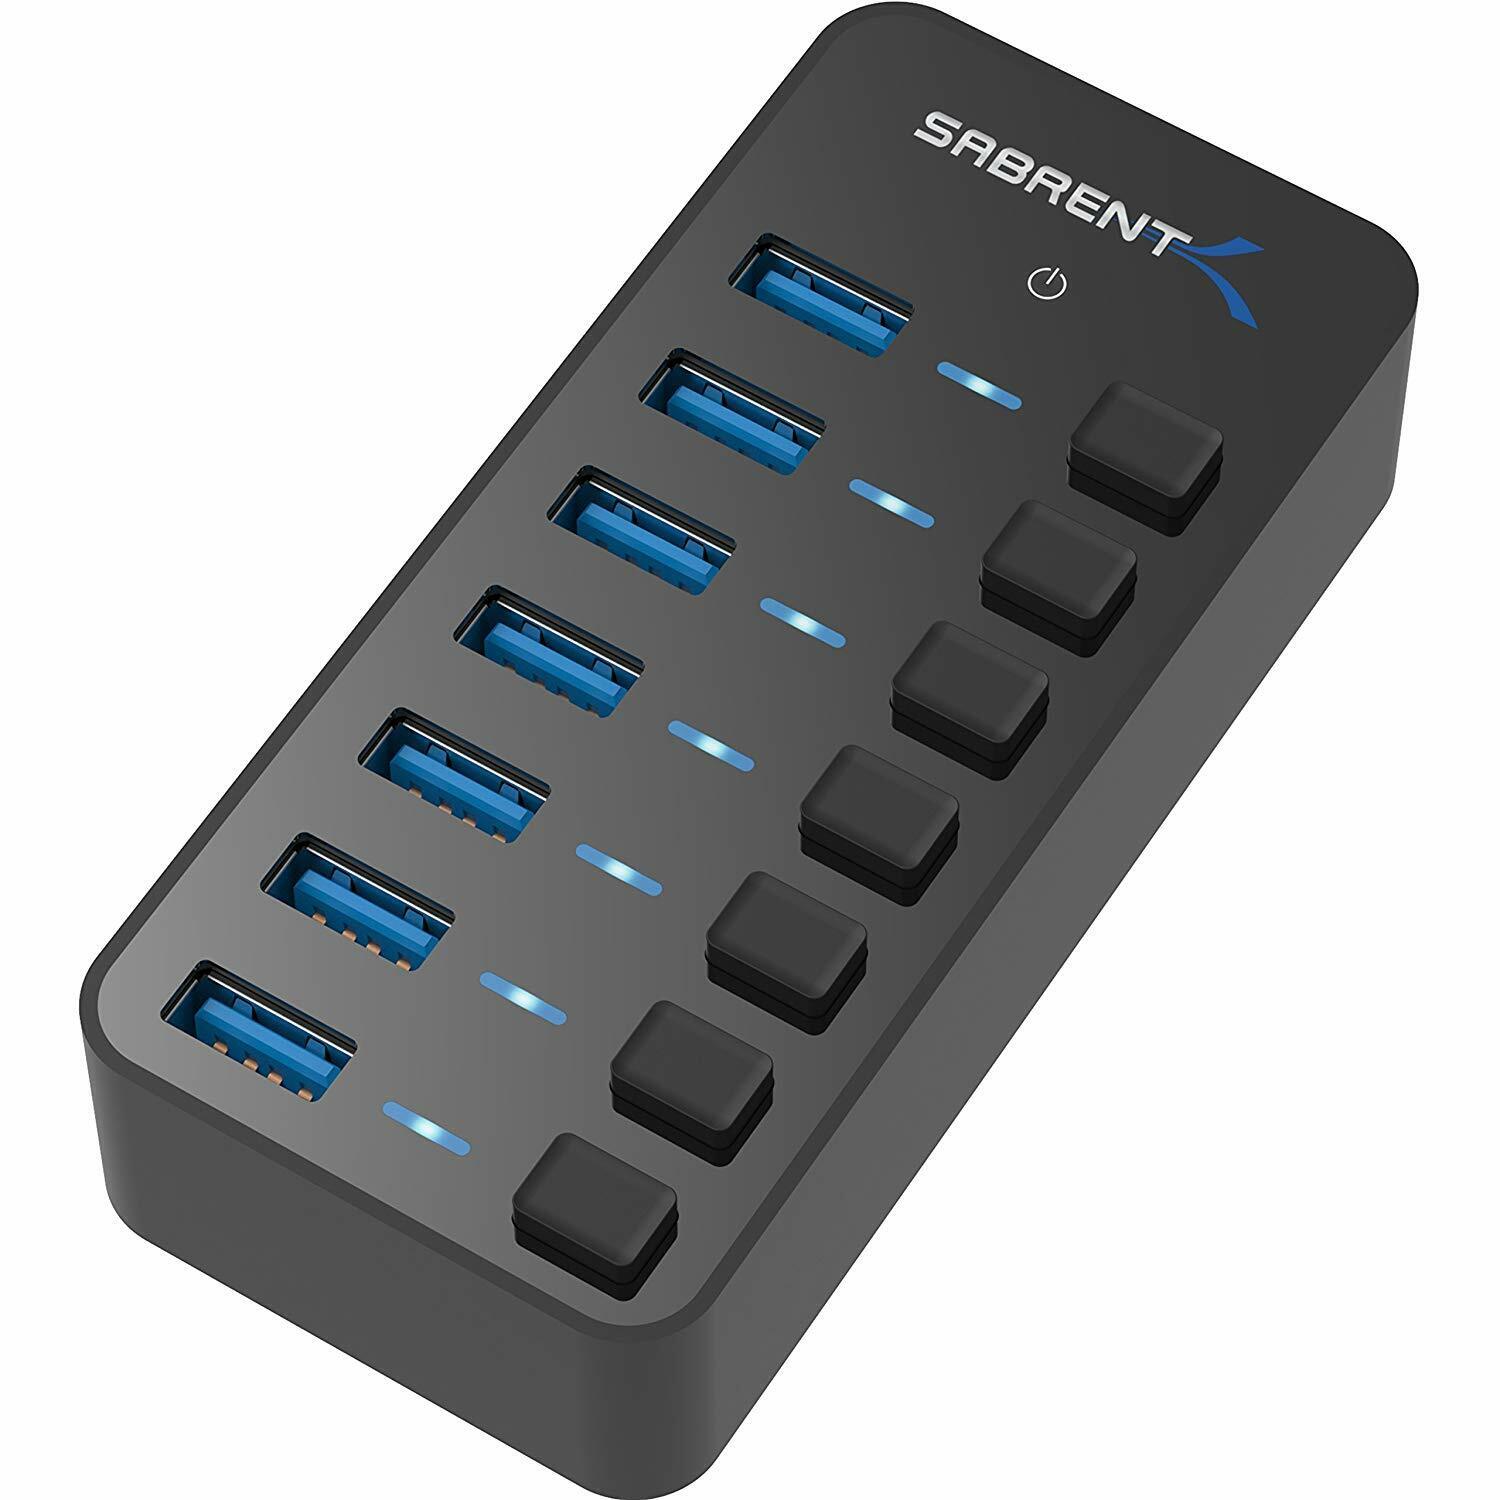 NEW Sabrent 7-Port USB Hub Splitter W Power Switches HB-BUP7